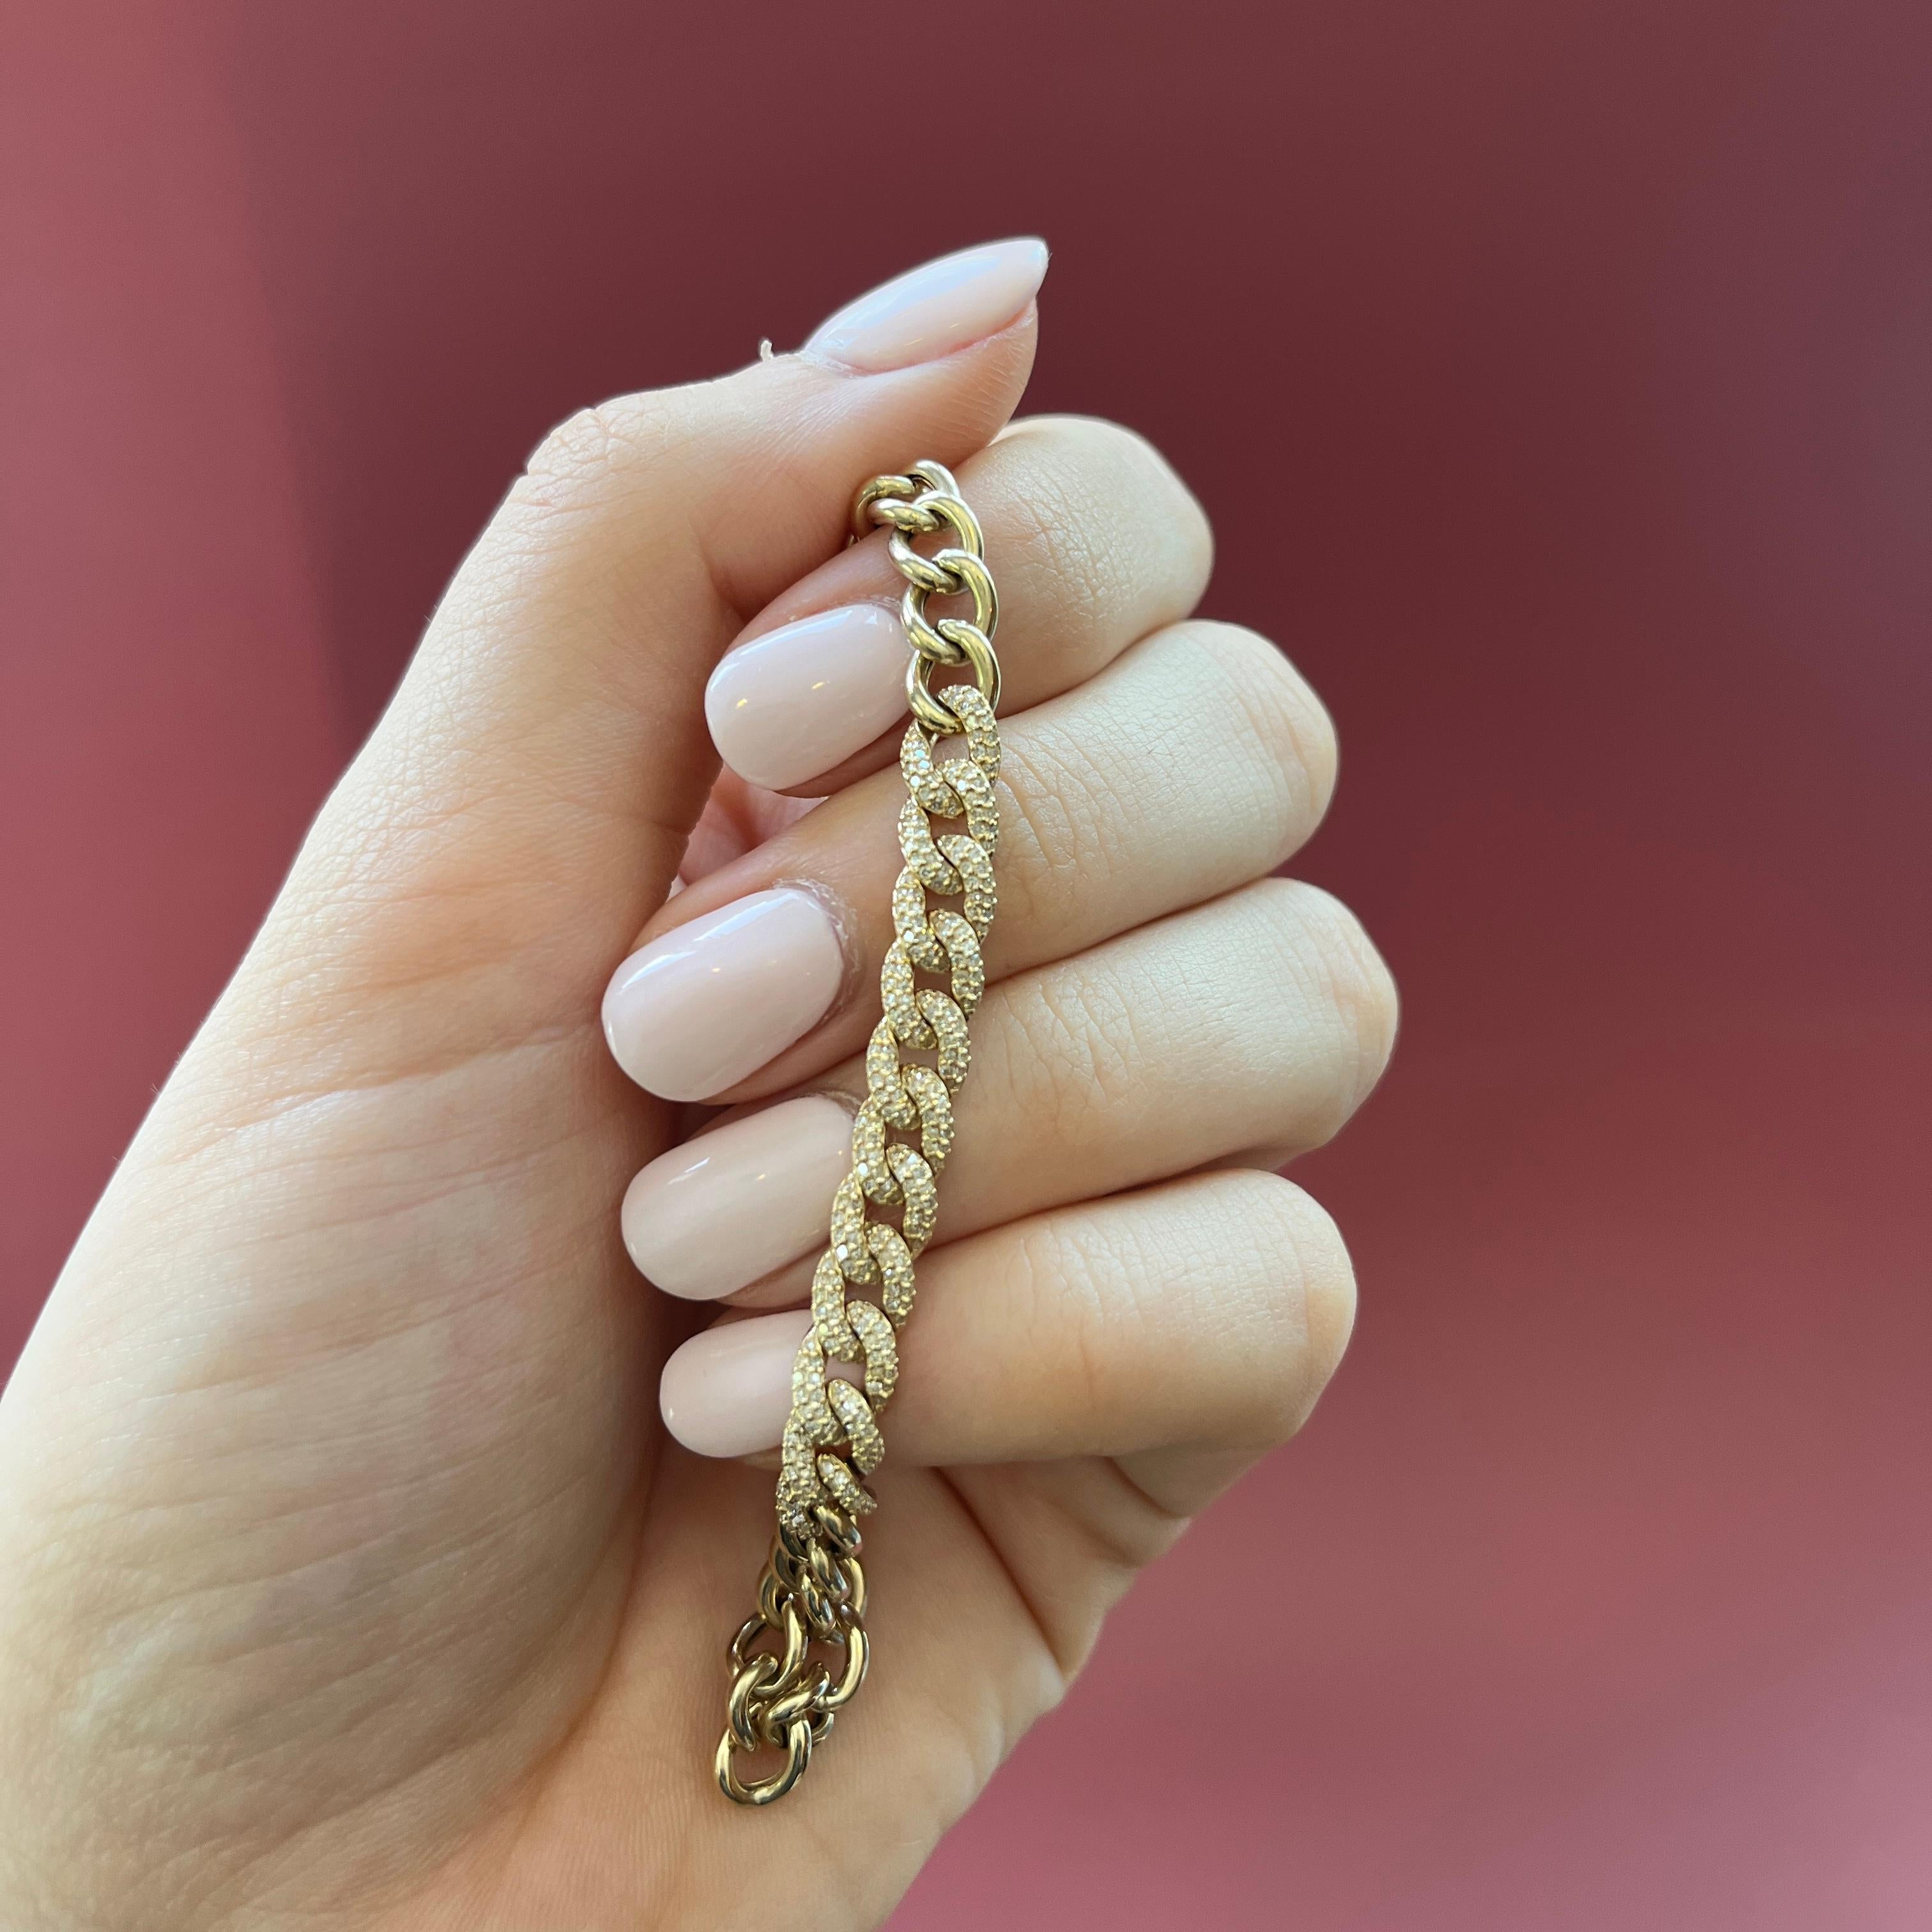 This exquisite bracelet is your new everyday accessory. Meticulously crafted from 14K solid gold, it's perfect for any occasion. Rock this chic bracelet alone, or layer it with other pieces for an even more stunning look.

14K Gold
Round Brilliant